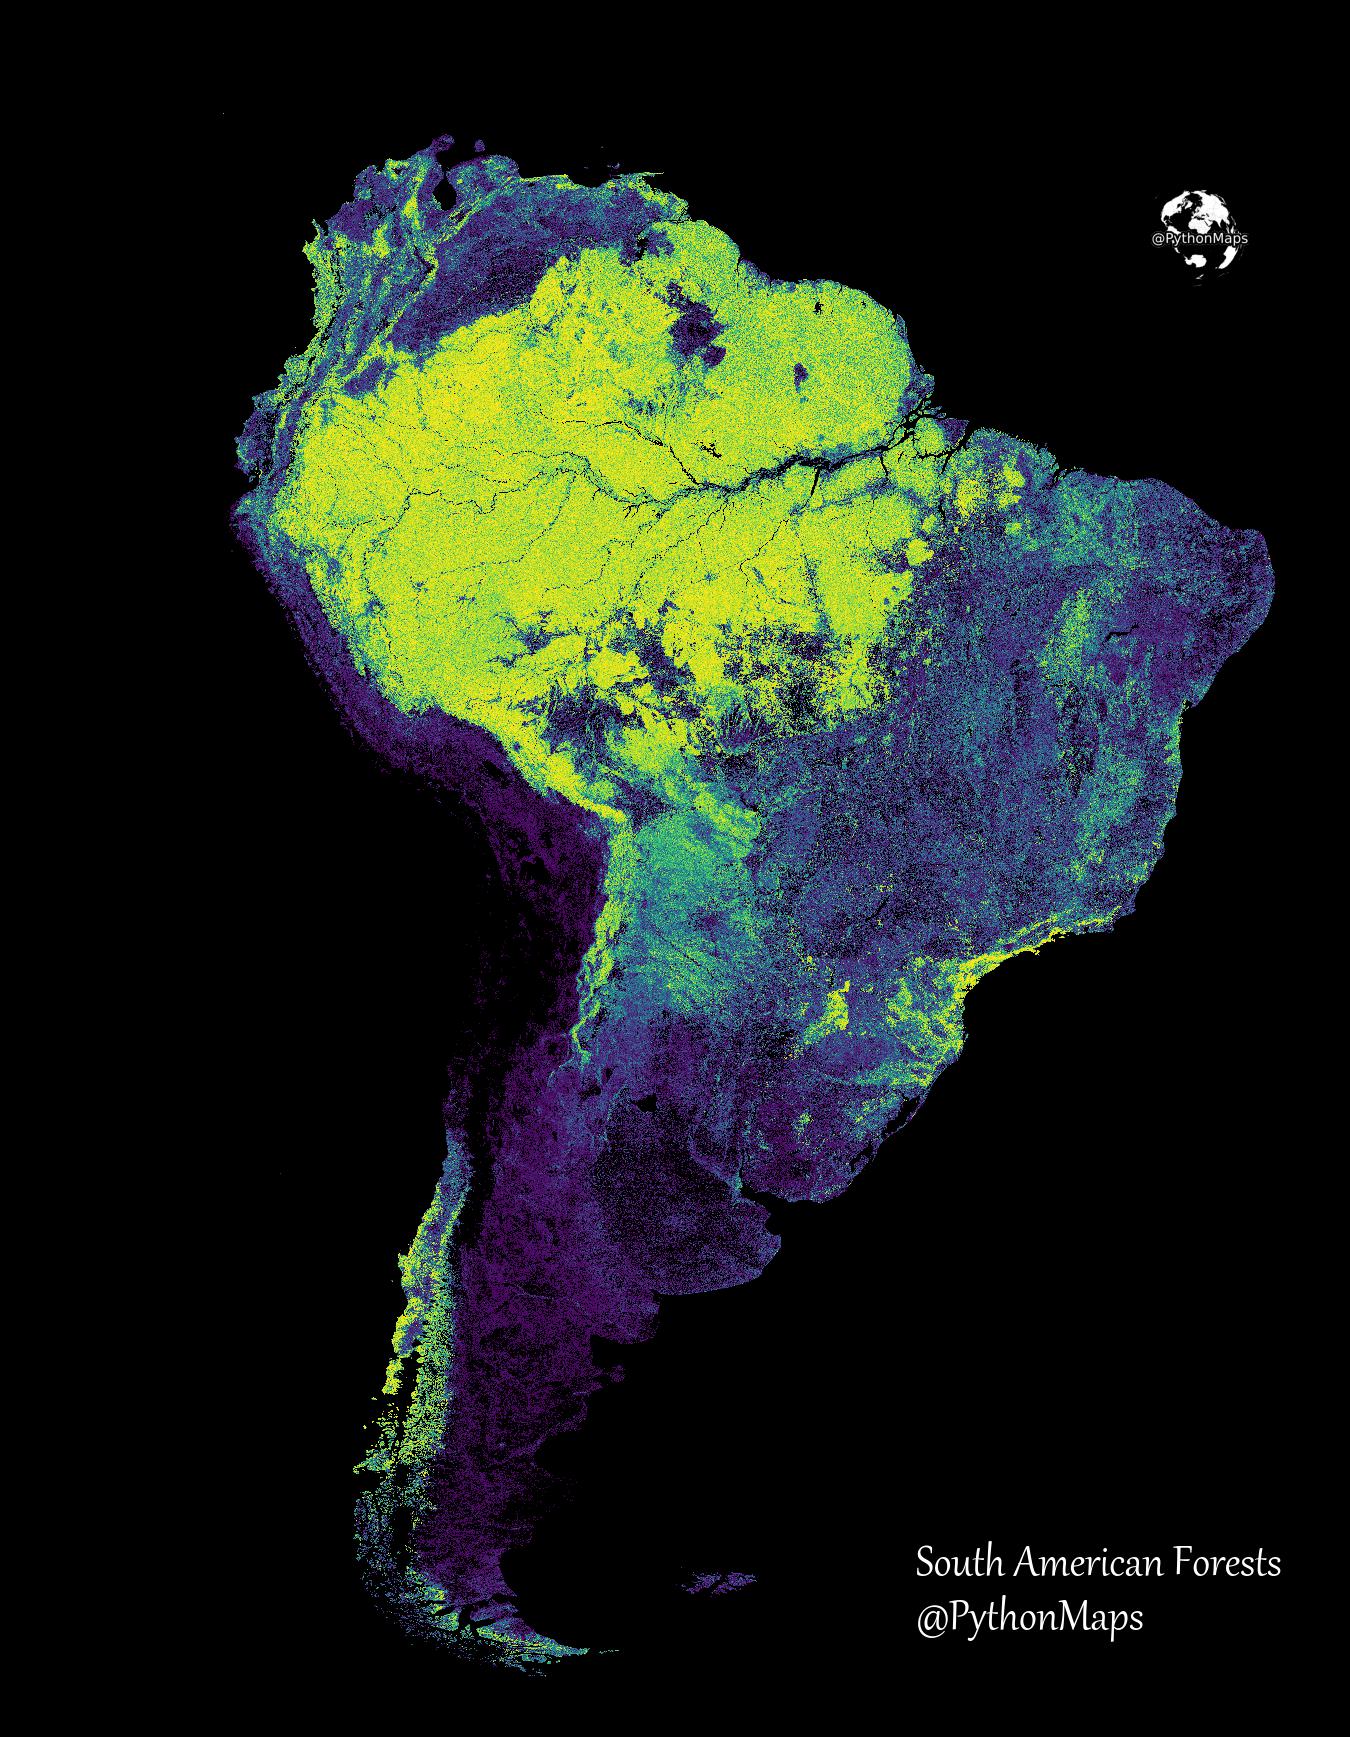 The Forests of South America